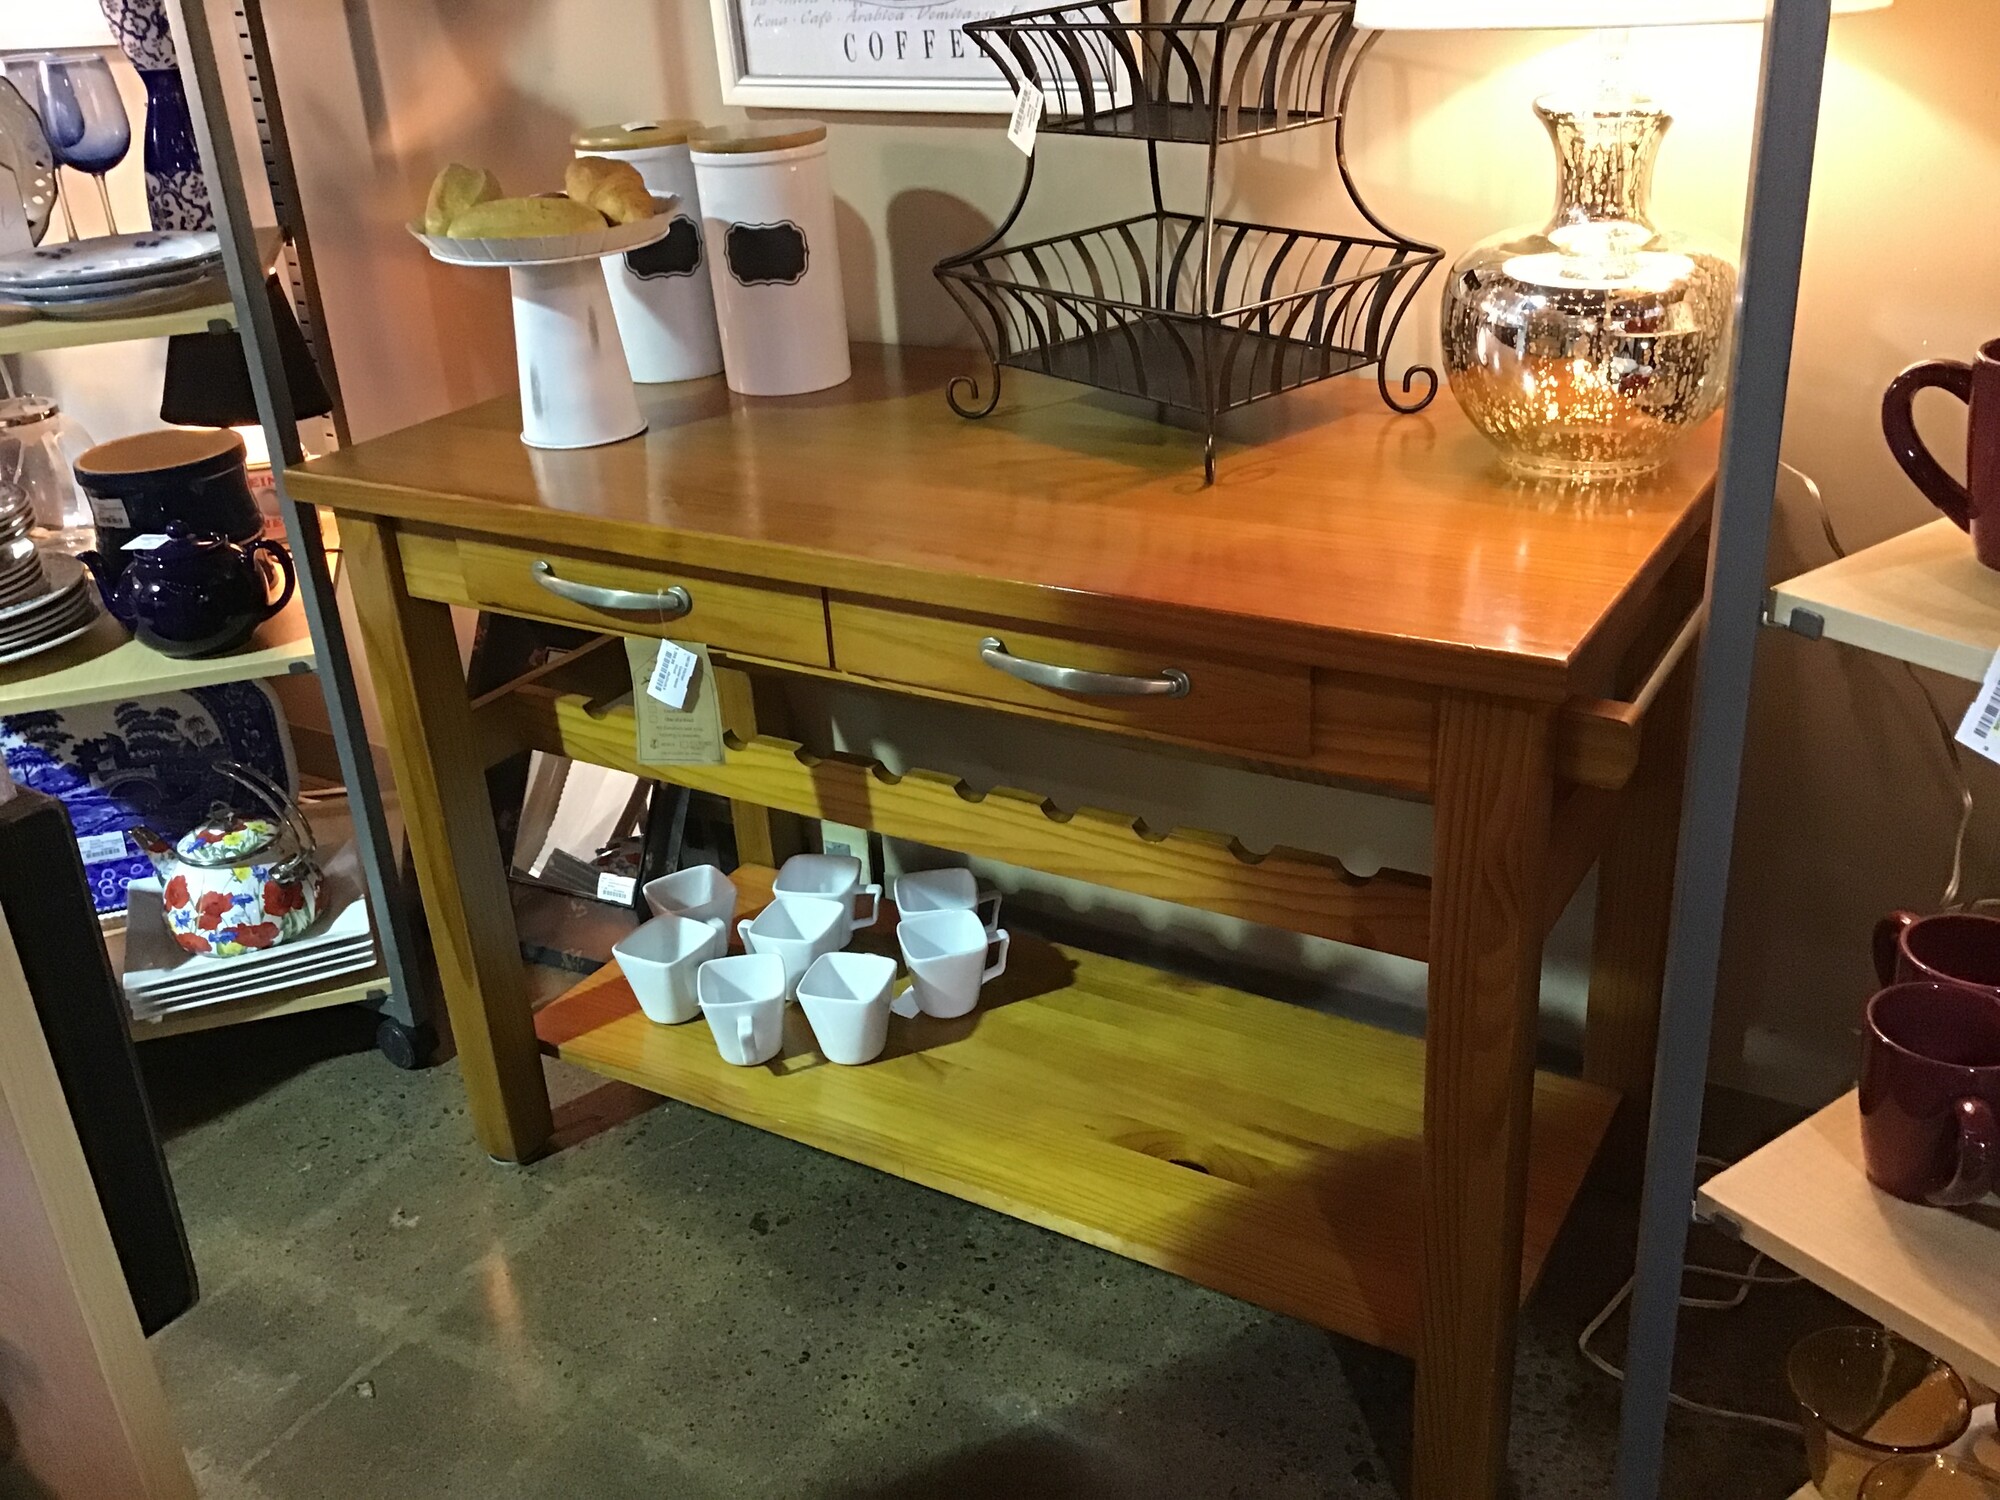 Center Island
Finished on all four sides
Long drawer with double silver pulls
Holds 10 wine bottles
Long lower shelf
Towel bar on side
Four sturdy straight legs

Dimensions: 48x24x32.5